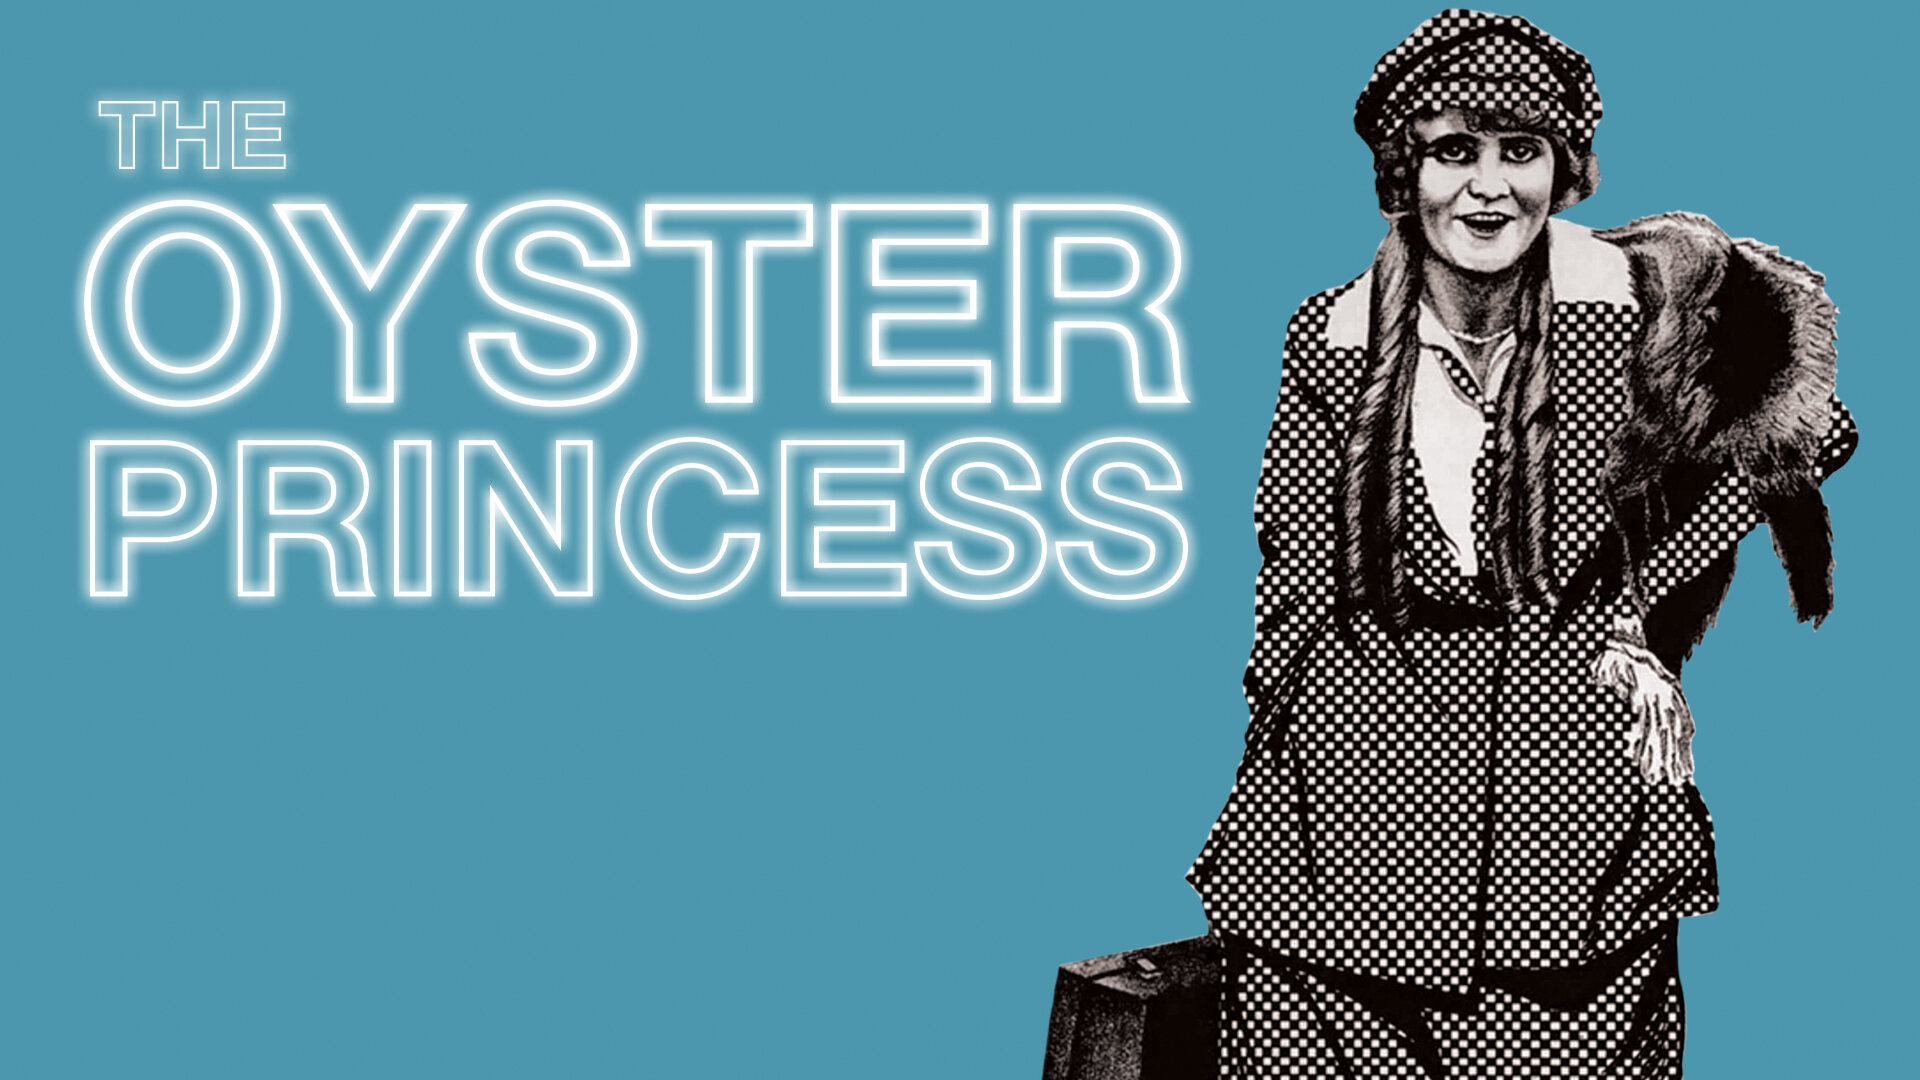 42-facts-about-the-movie-the-oyster-princess